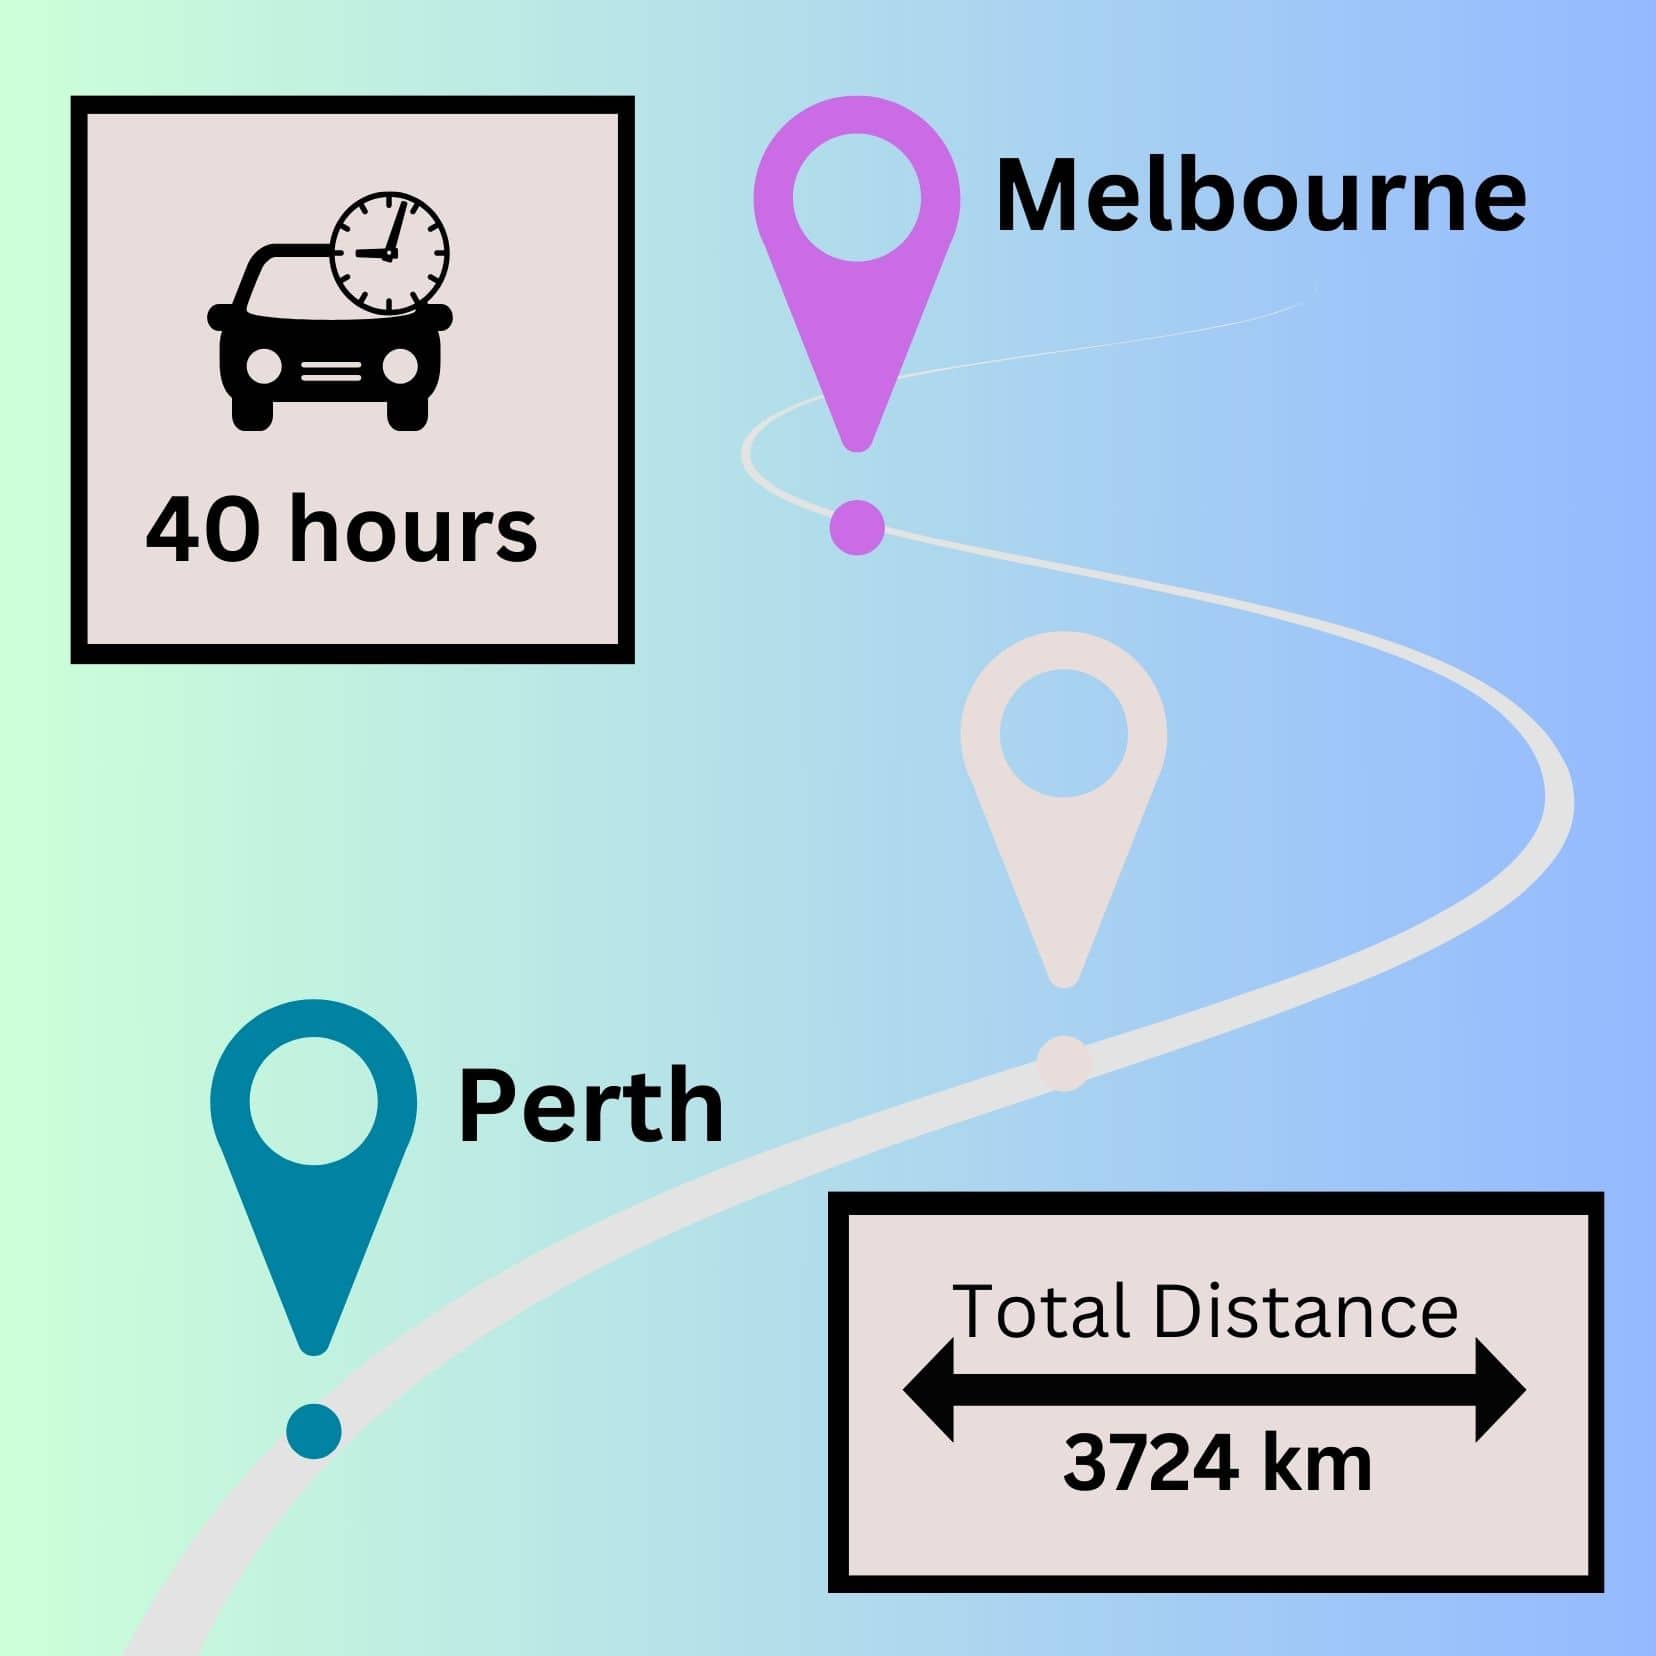 infographic showing travel time and distance driving from Perth to Melbourne